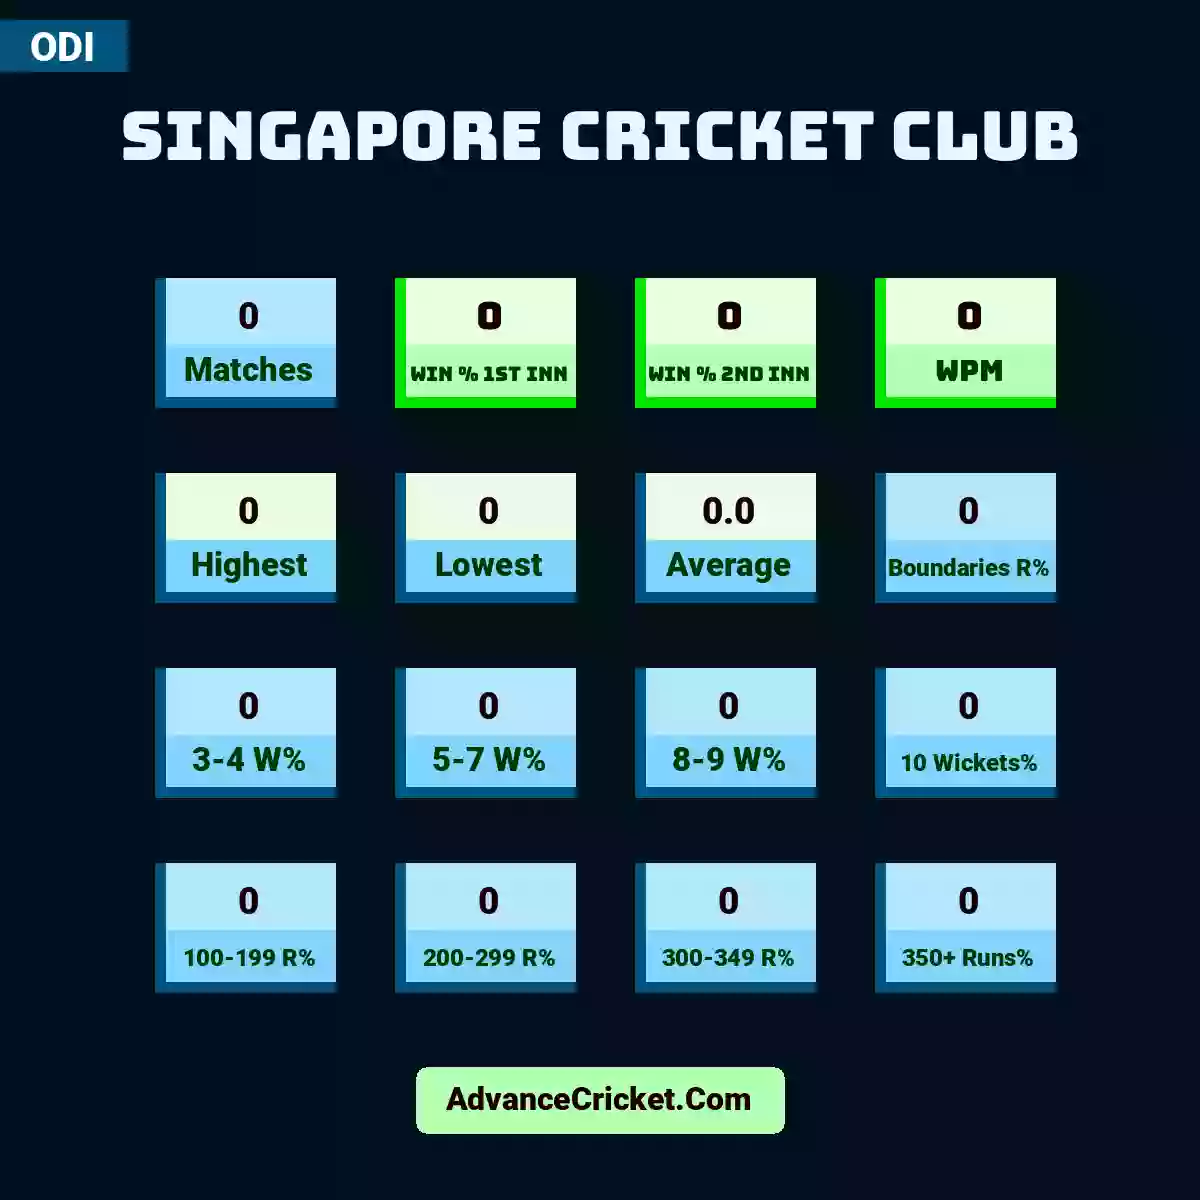 Image showing Singapore Cricket Club with Matches: 0, Win % 1st Inn: 0, Win % 2nd Inn: 0, WPM: 0, Highest: 0, Lowest: 0, Average: 0.0, Boundaries R%: 0, 3-4 W%: 0, 5-7 W%: 0, 8-9 W%: 0, 10 Wickets%: 0, 100-199 R%: 0, 200-299 R%: 0, 300-349 R%: 0, 350+ Runs%: 0.